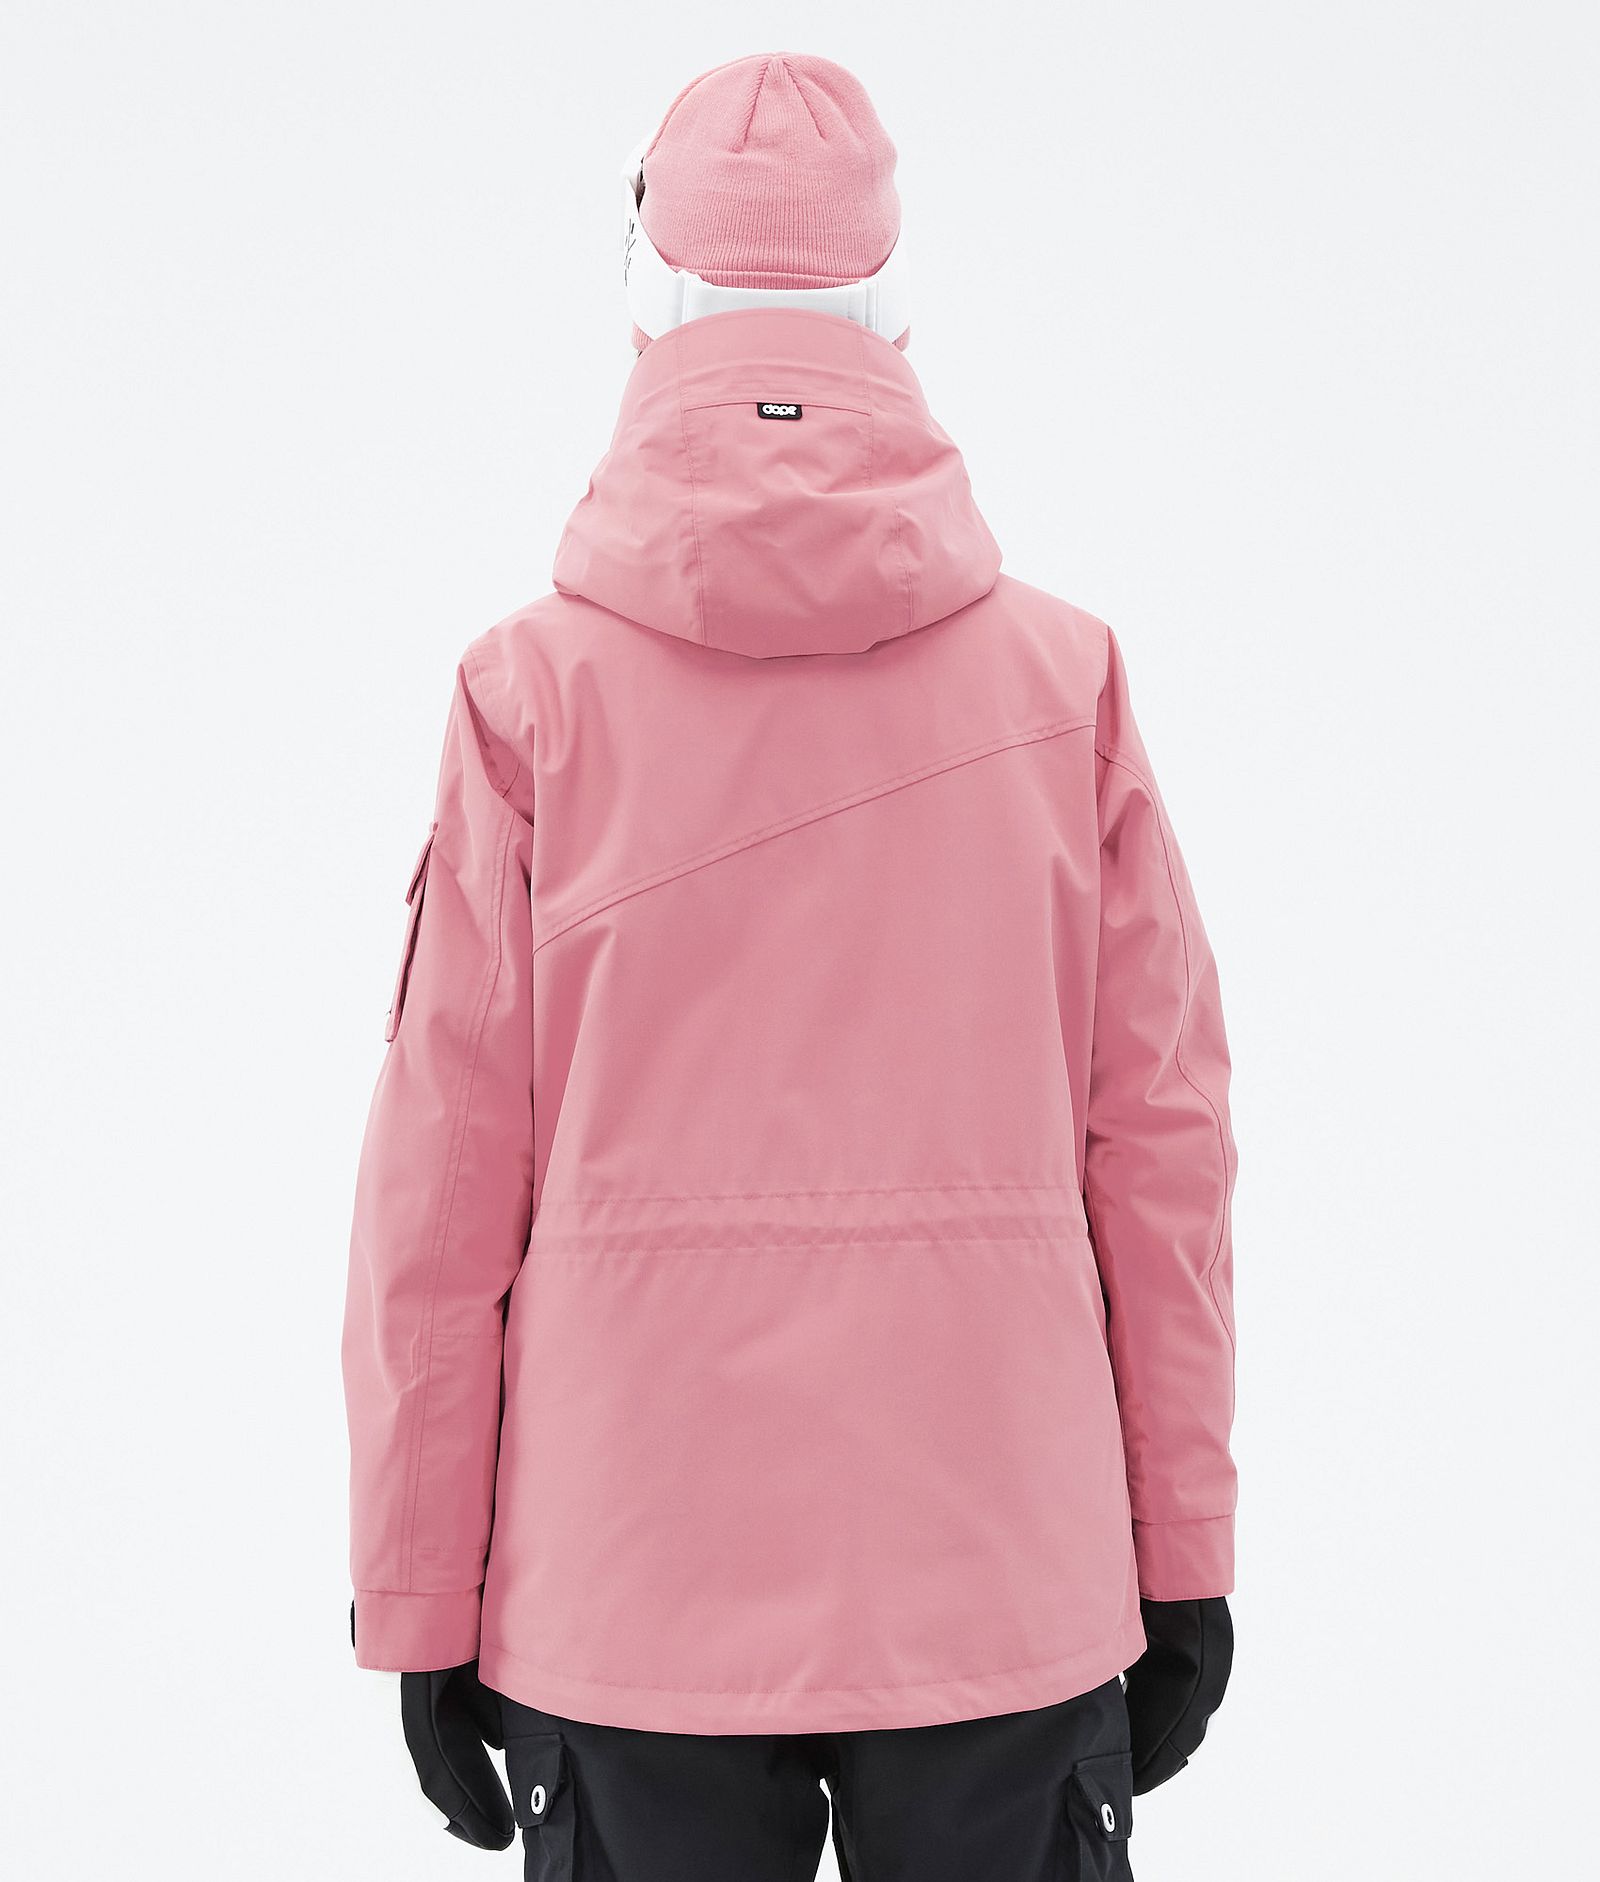 Dope Adept W Giacca Sci Donna Pink/Black